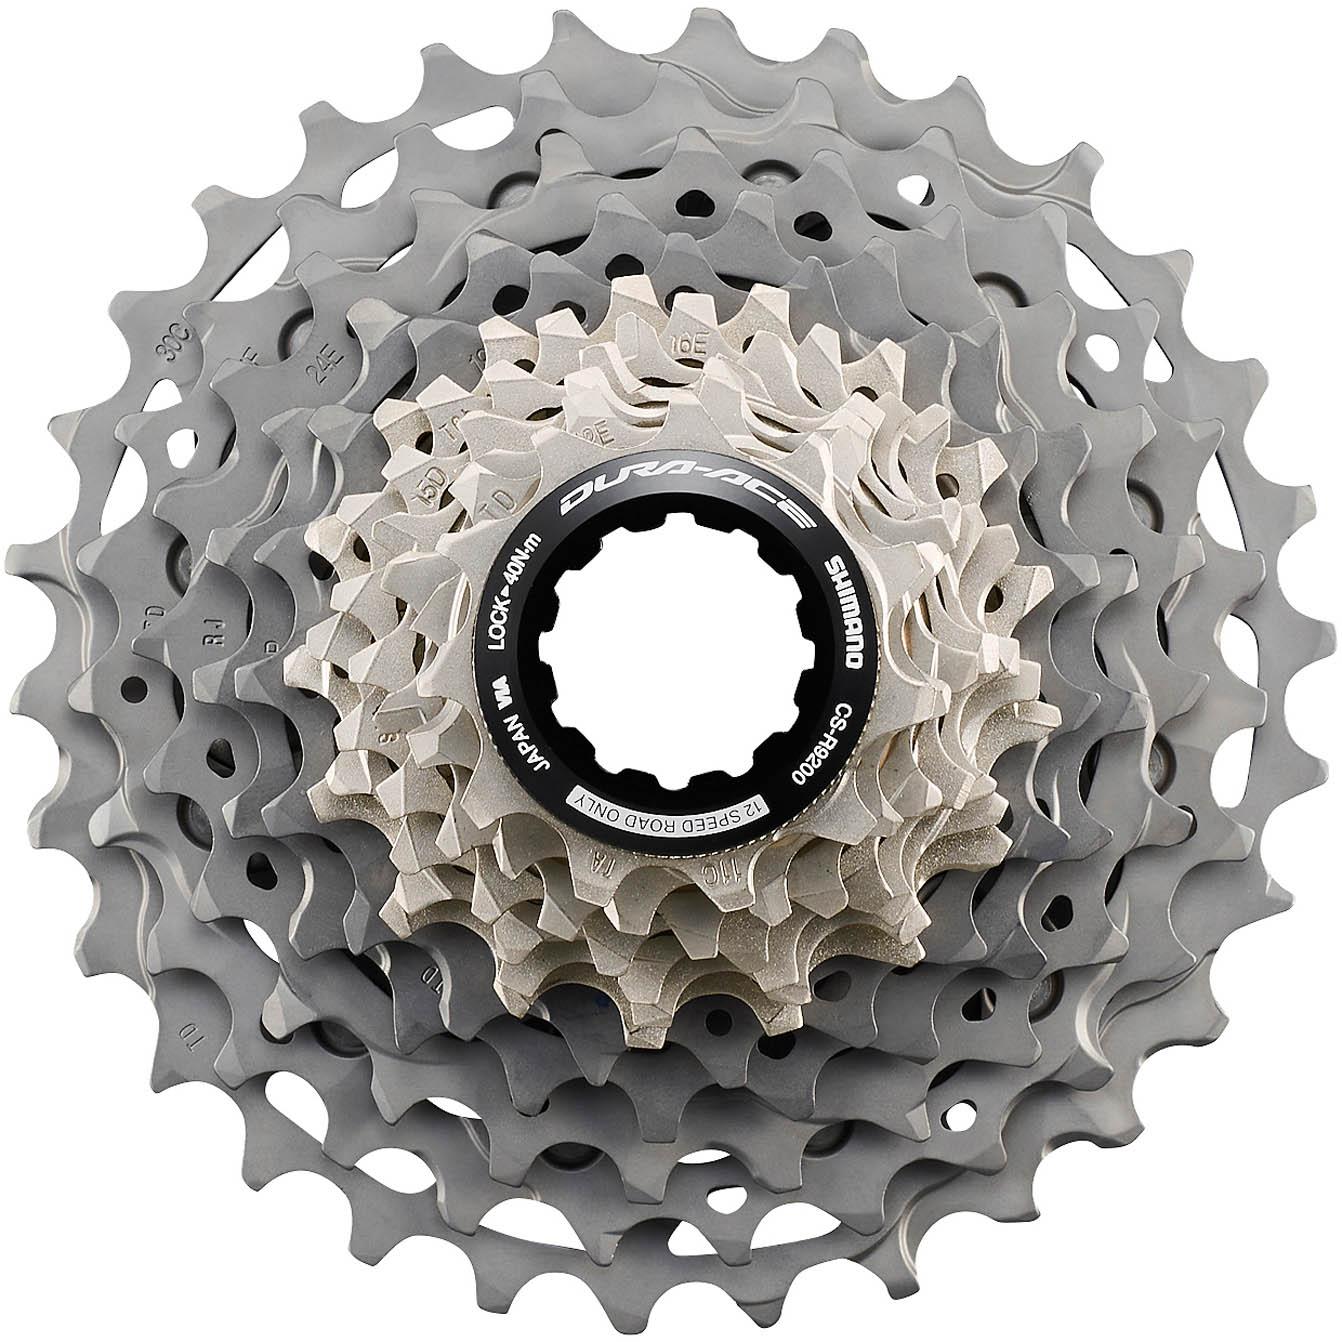 Shimano Dura-ace R9200 12 Speed Cassette  Silver